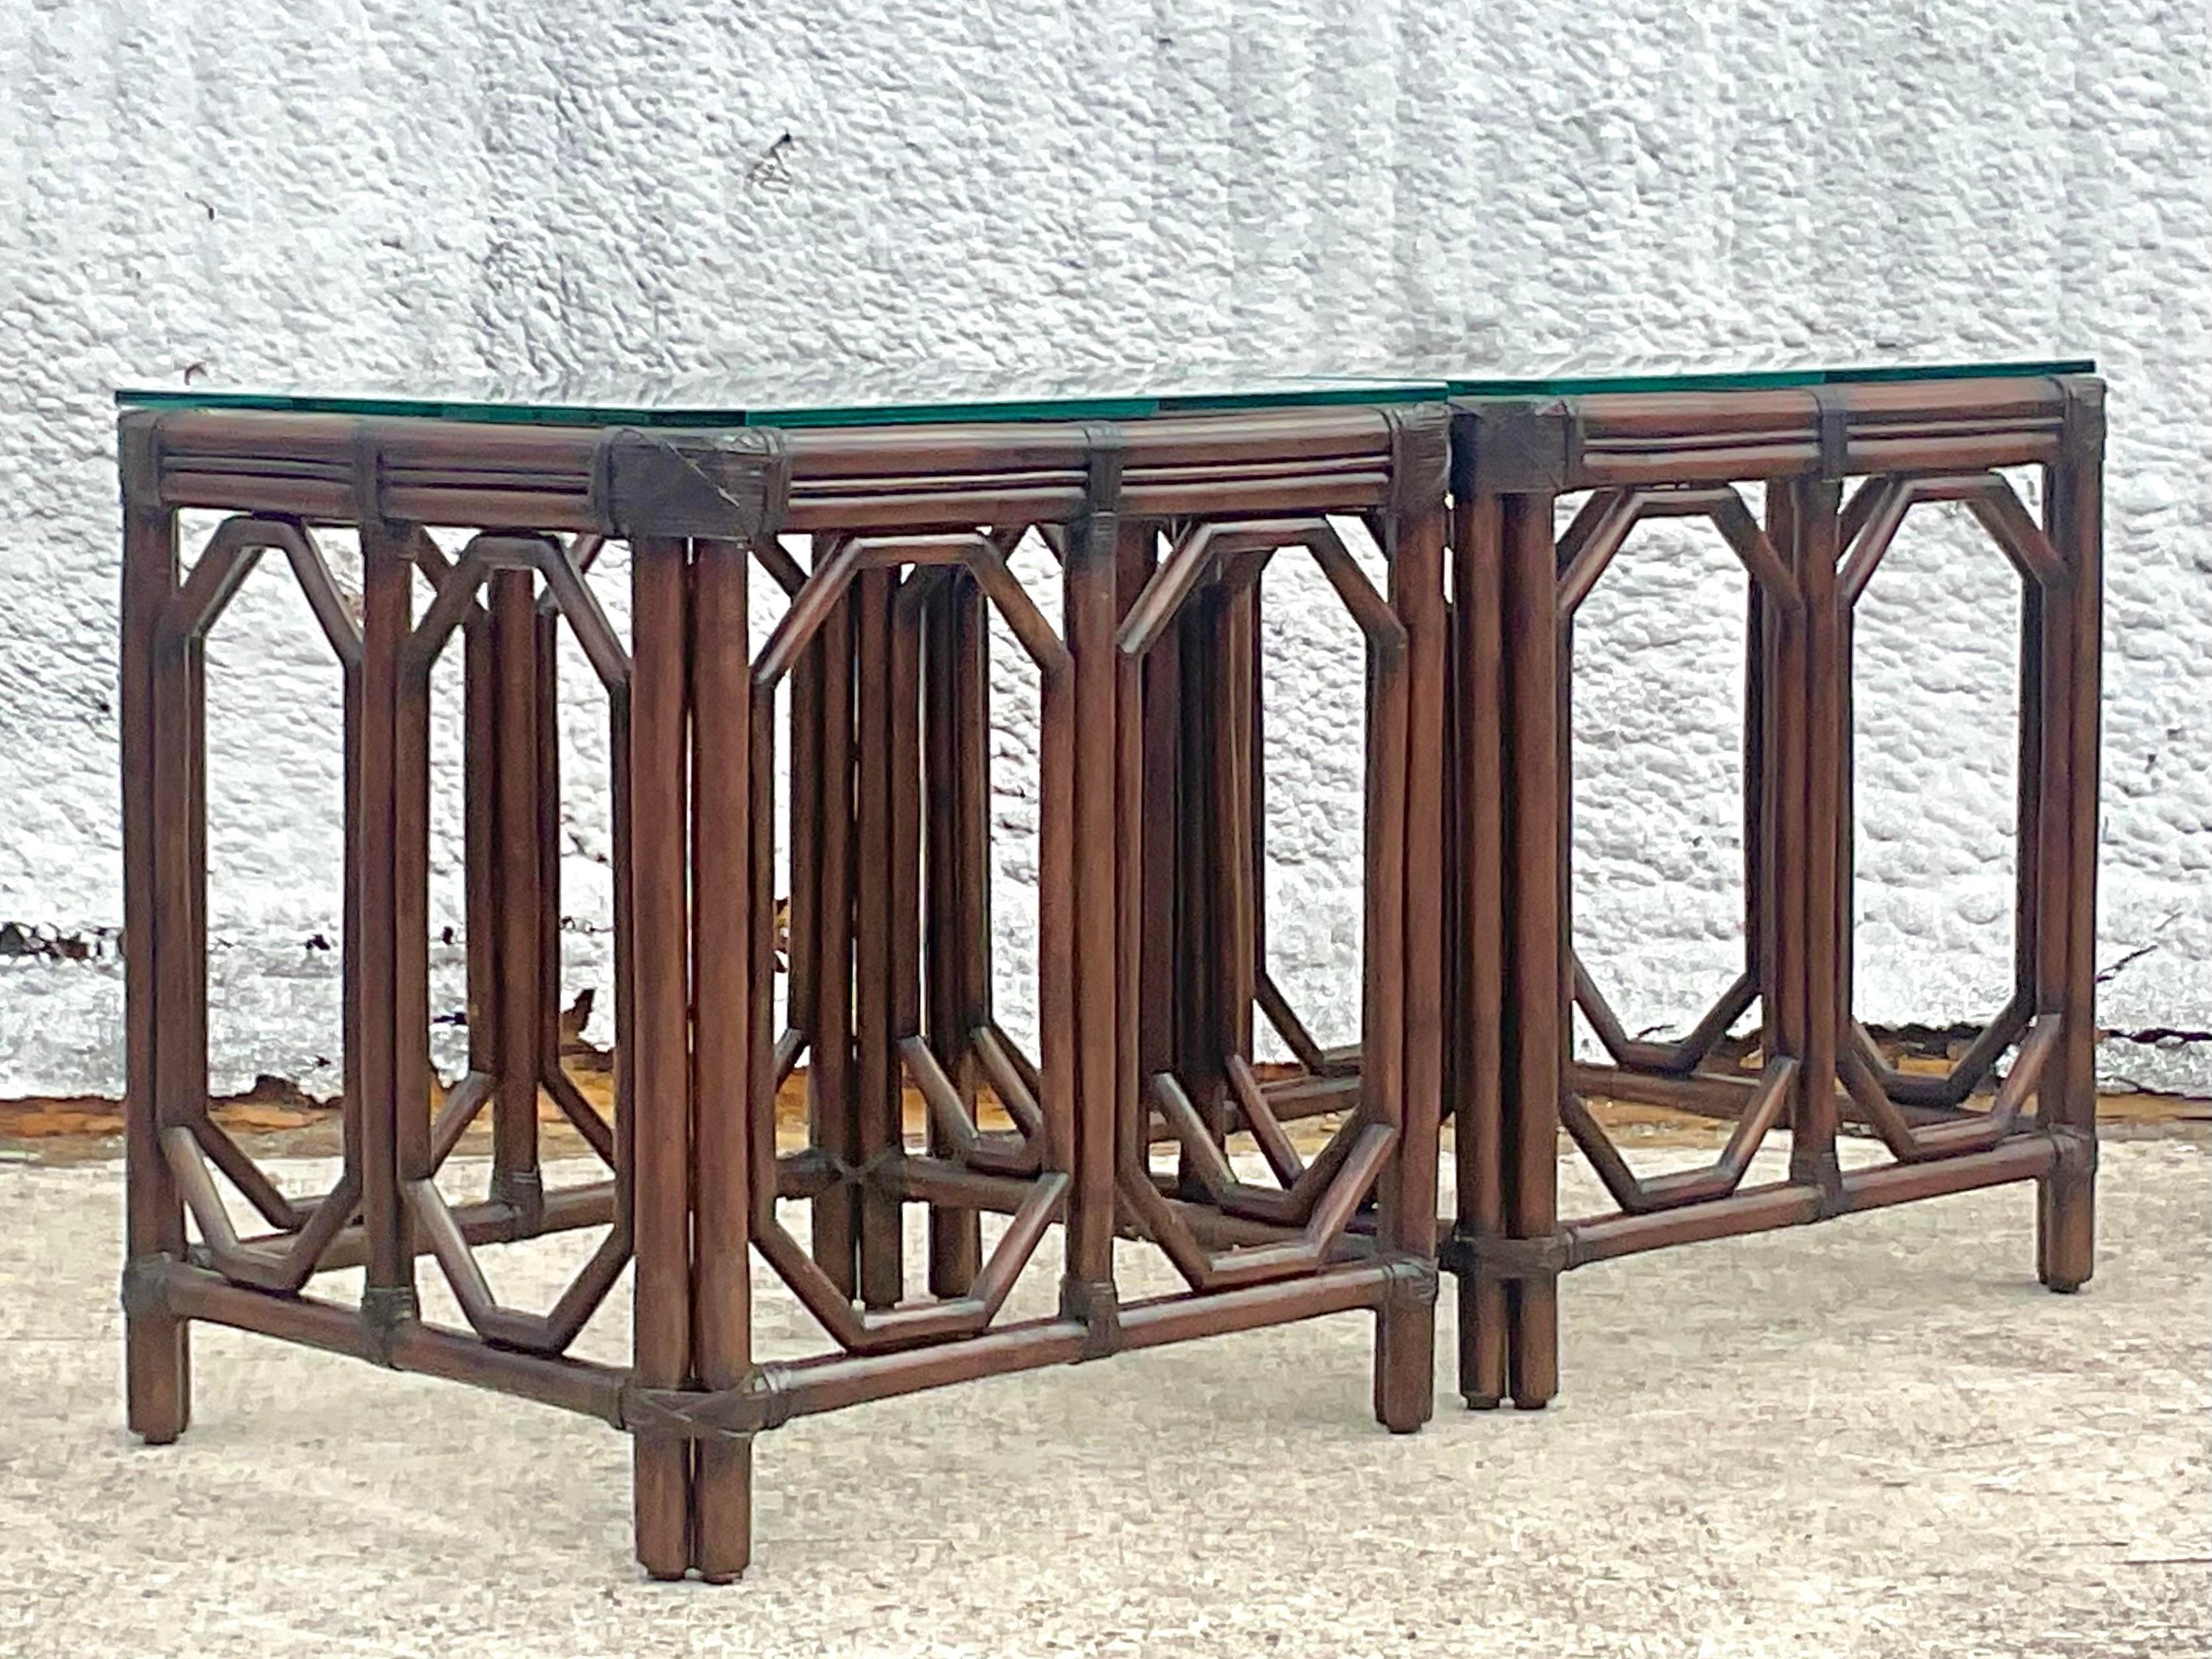 A fabulous pair of vintage Coastal side table. Beautiful octagon fretwork in the rattan. A deep rich brown finish. Acquired from a Palm Beach estate.